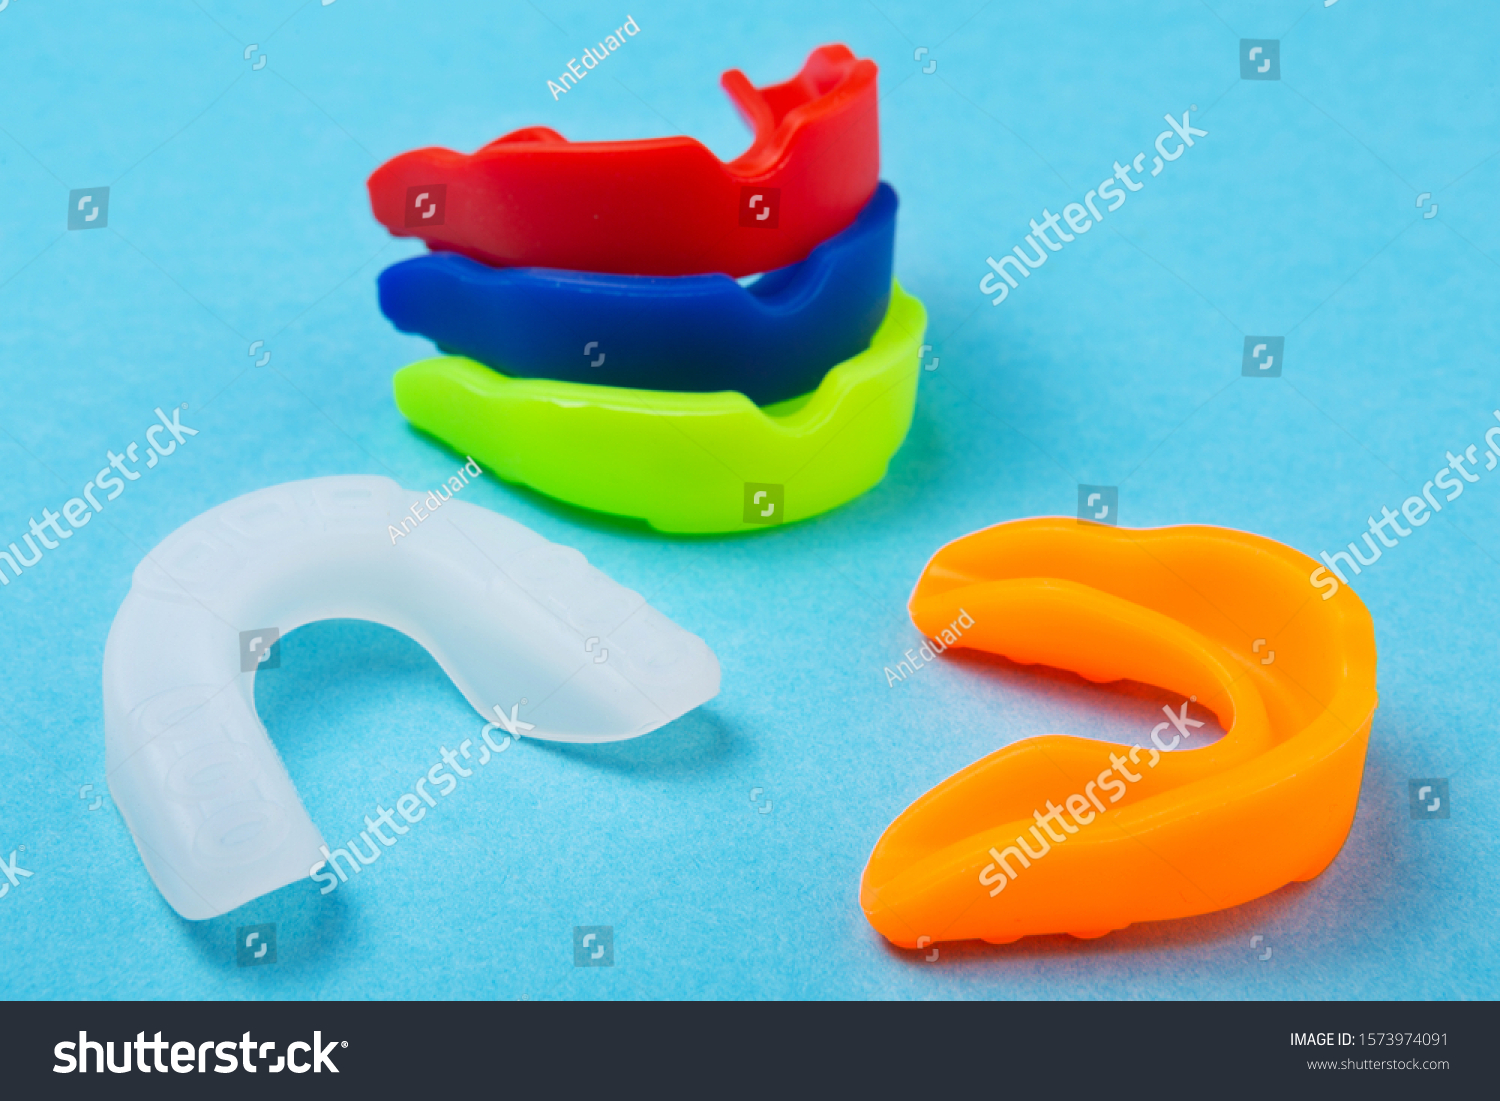 many colored boxing mouth guards lie on a blue background, sports concept #1573974091